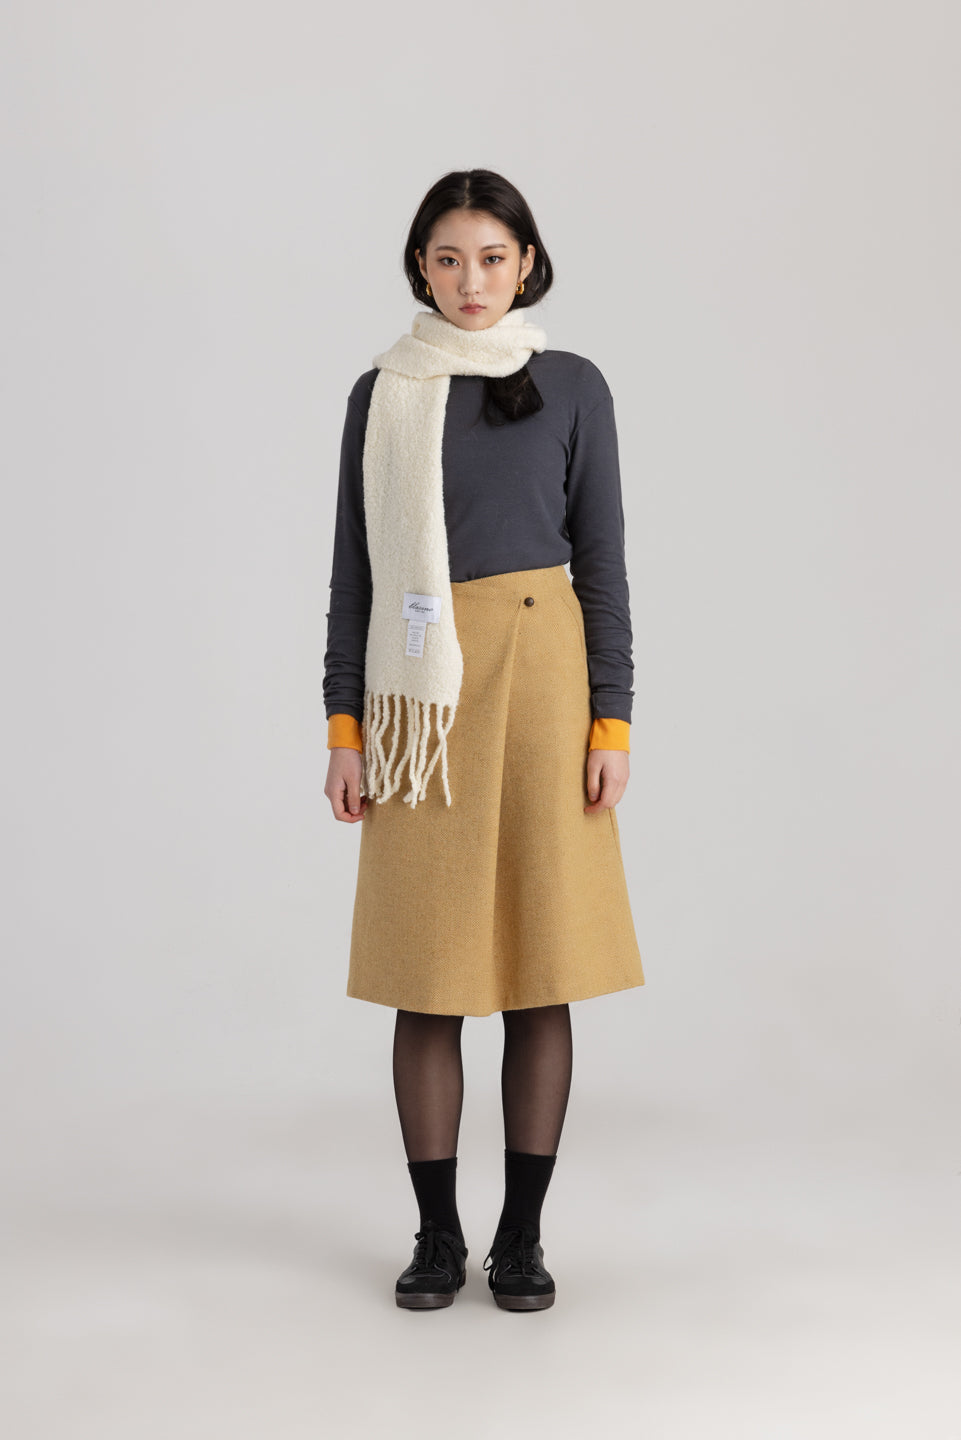 Classic button front skirt